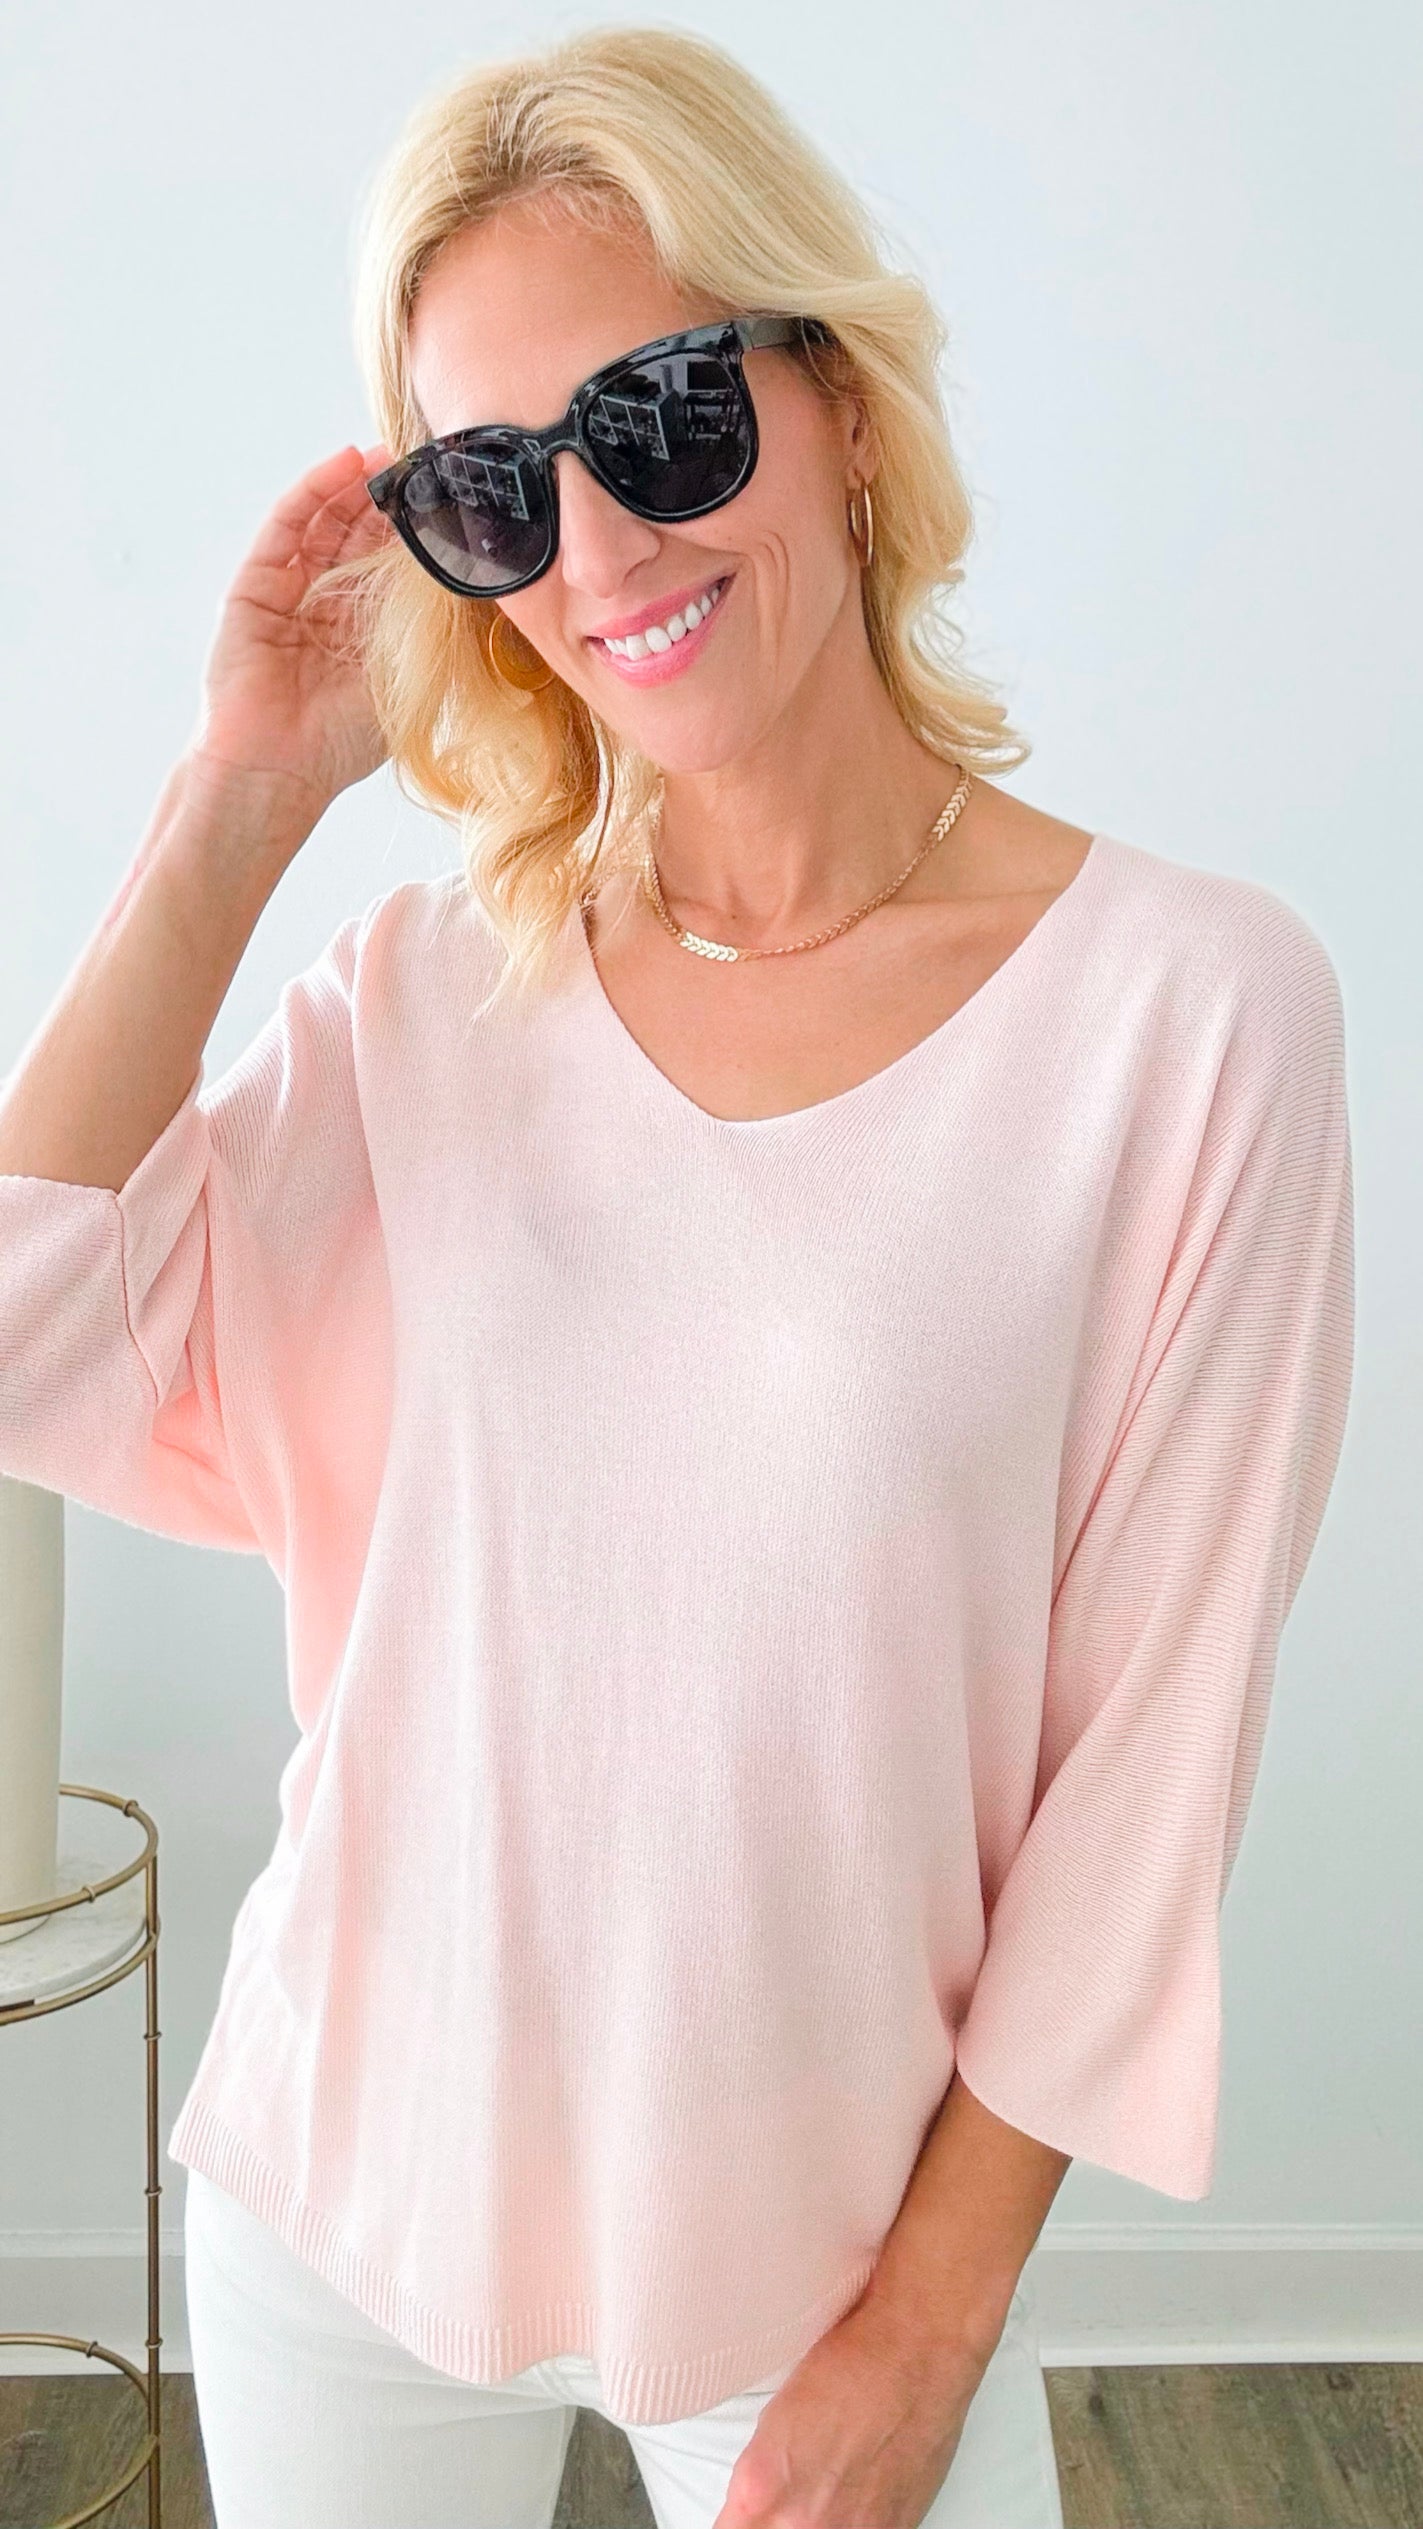 Sundays Ribbed Italian Top - Light Pink-130 Long Sleeve Tops-Italianissimo-Coastal Bloom Boutique, find the trendiest versions of the popular styles and looks Located in Indialantic, FL